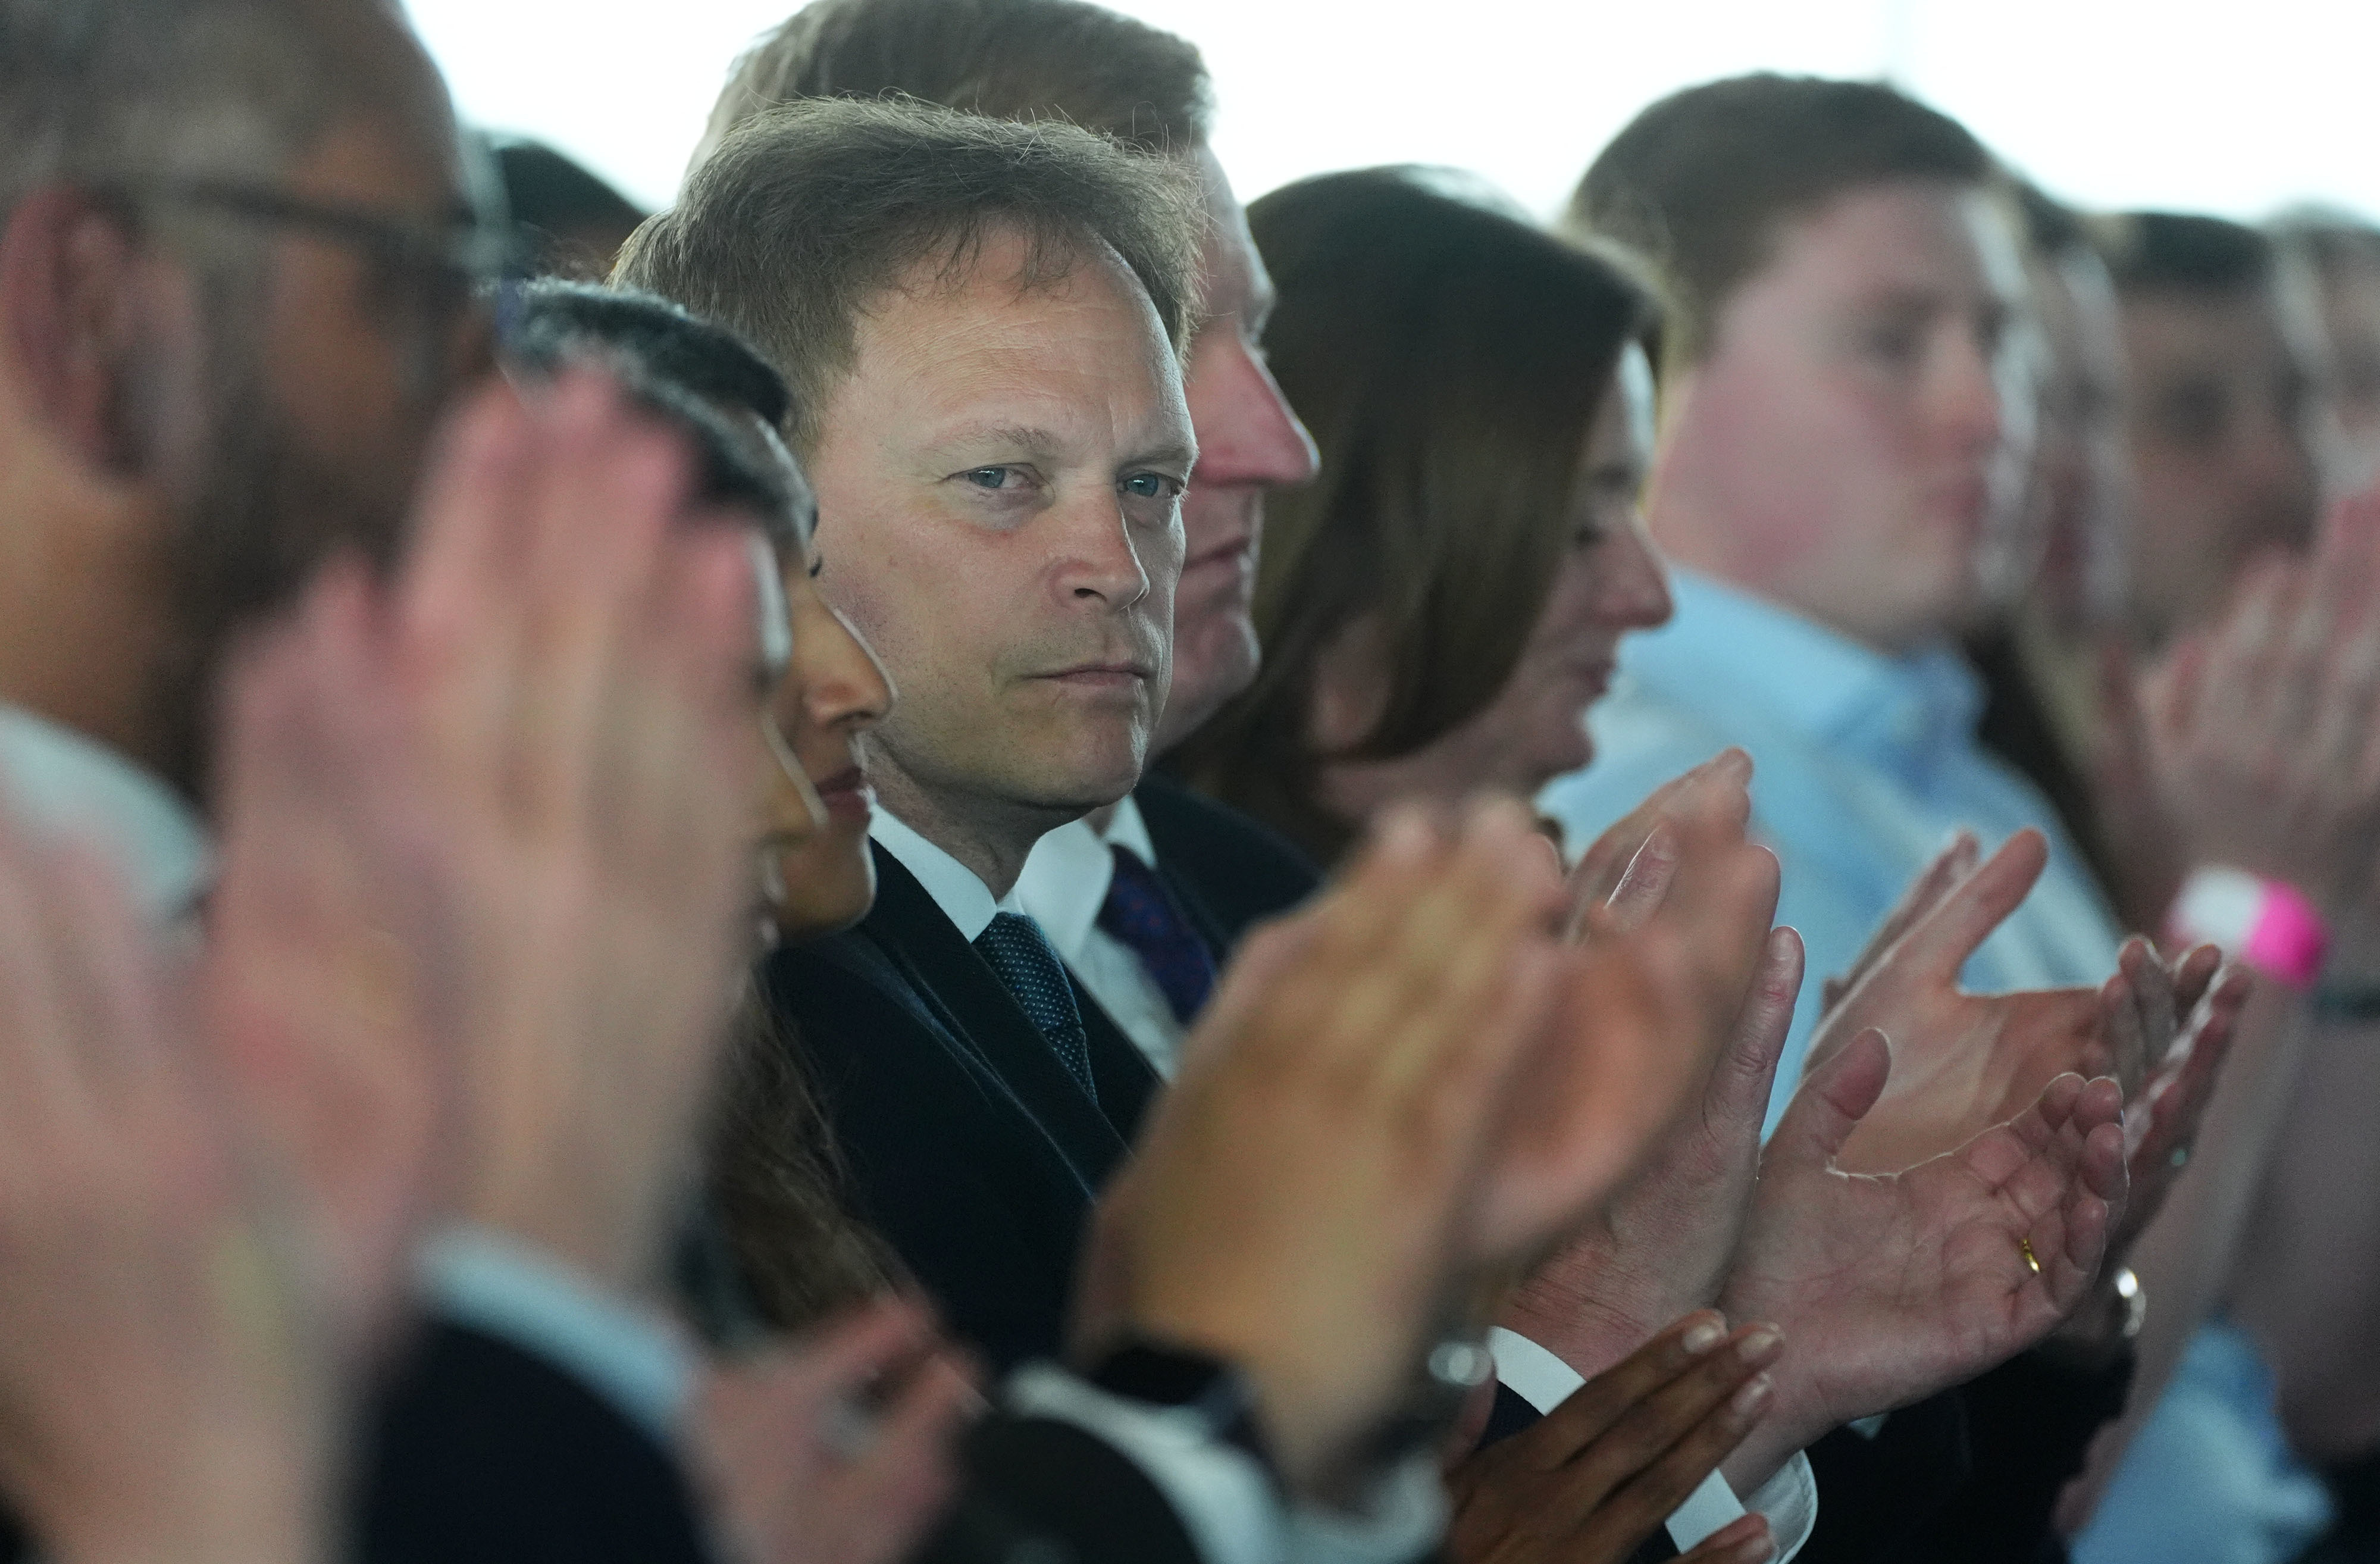 Grant Shapps scowls